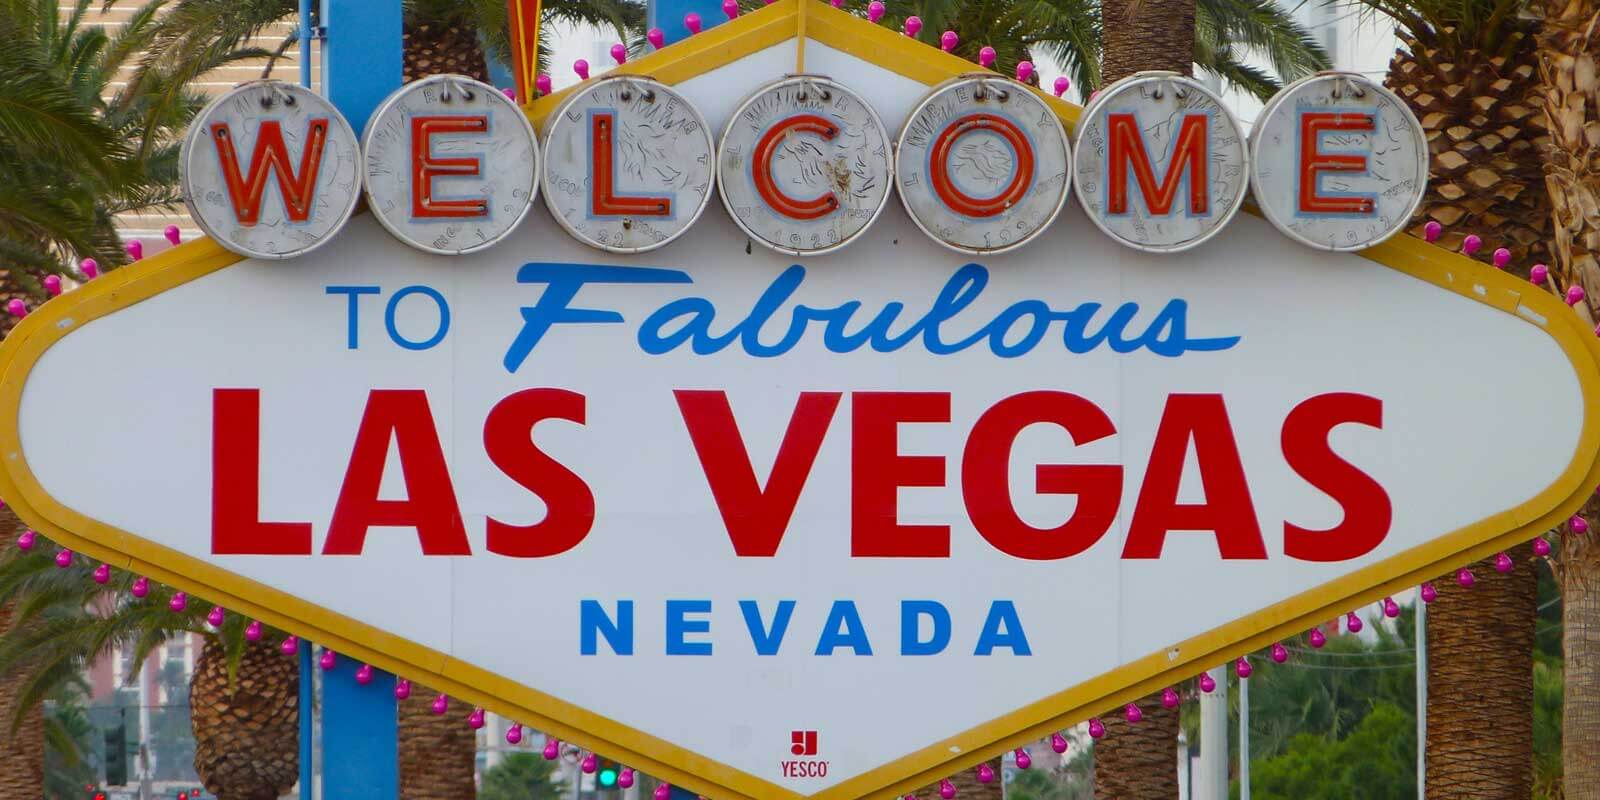 Sign Lights Up At Night With Palm Trees And A Sign To Las Vegas Background,  Picture Las Vegas Sign Background Image And Wallpaper for Free Download